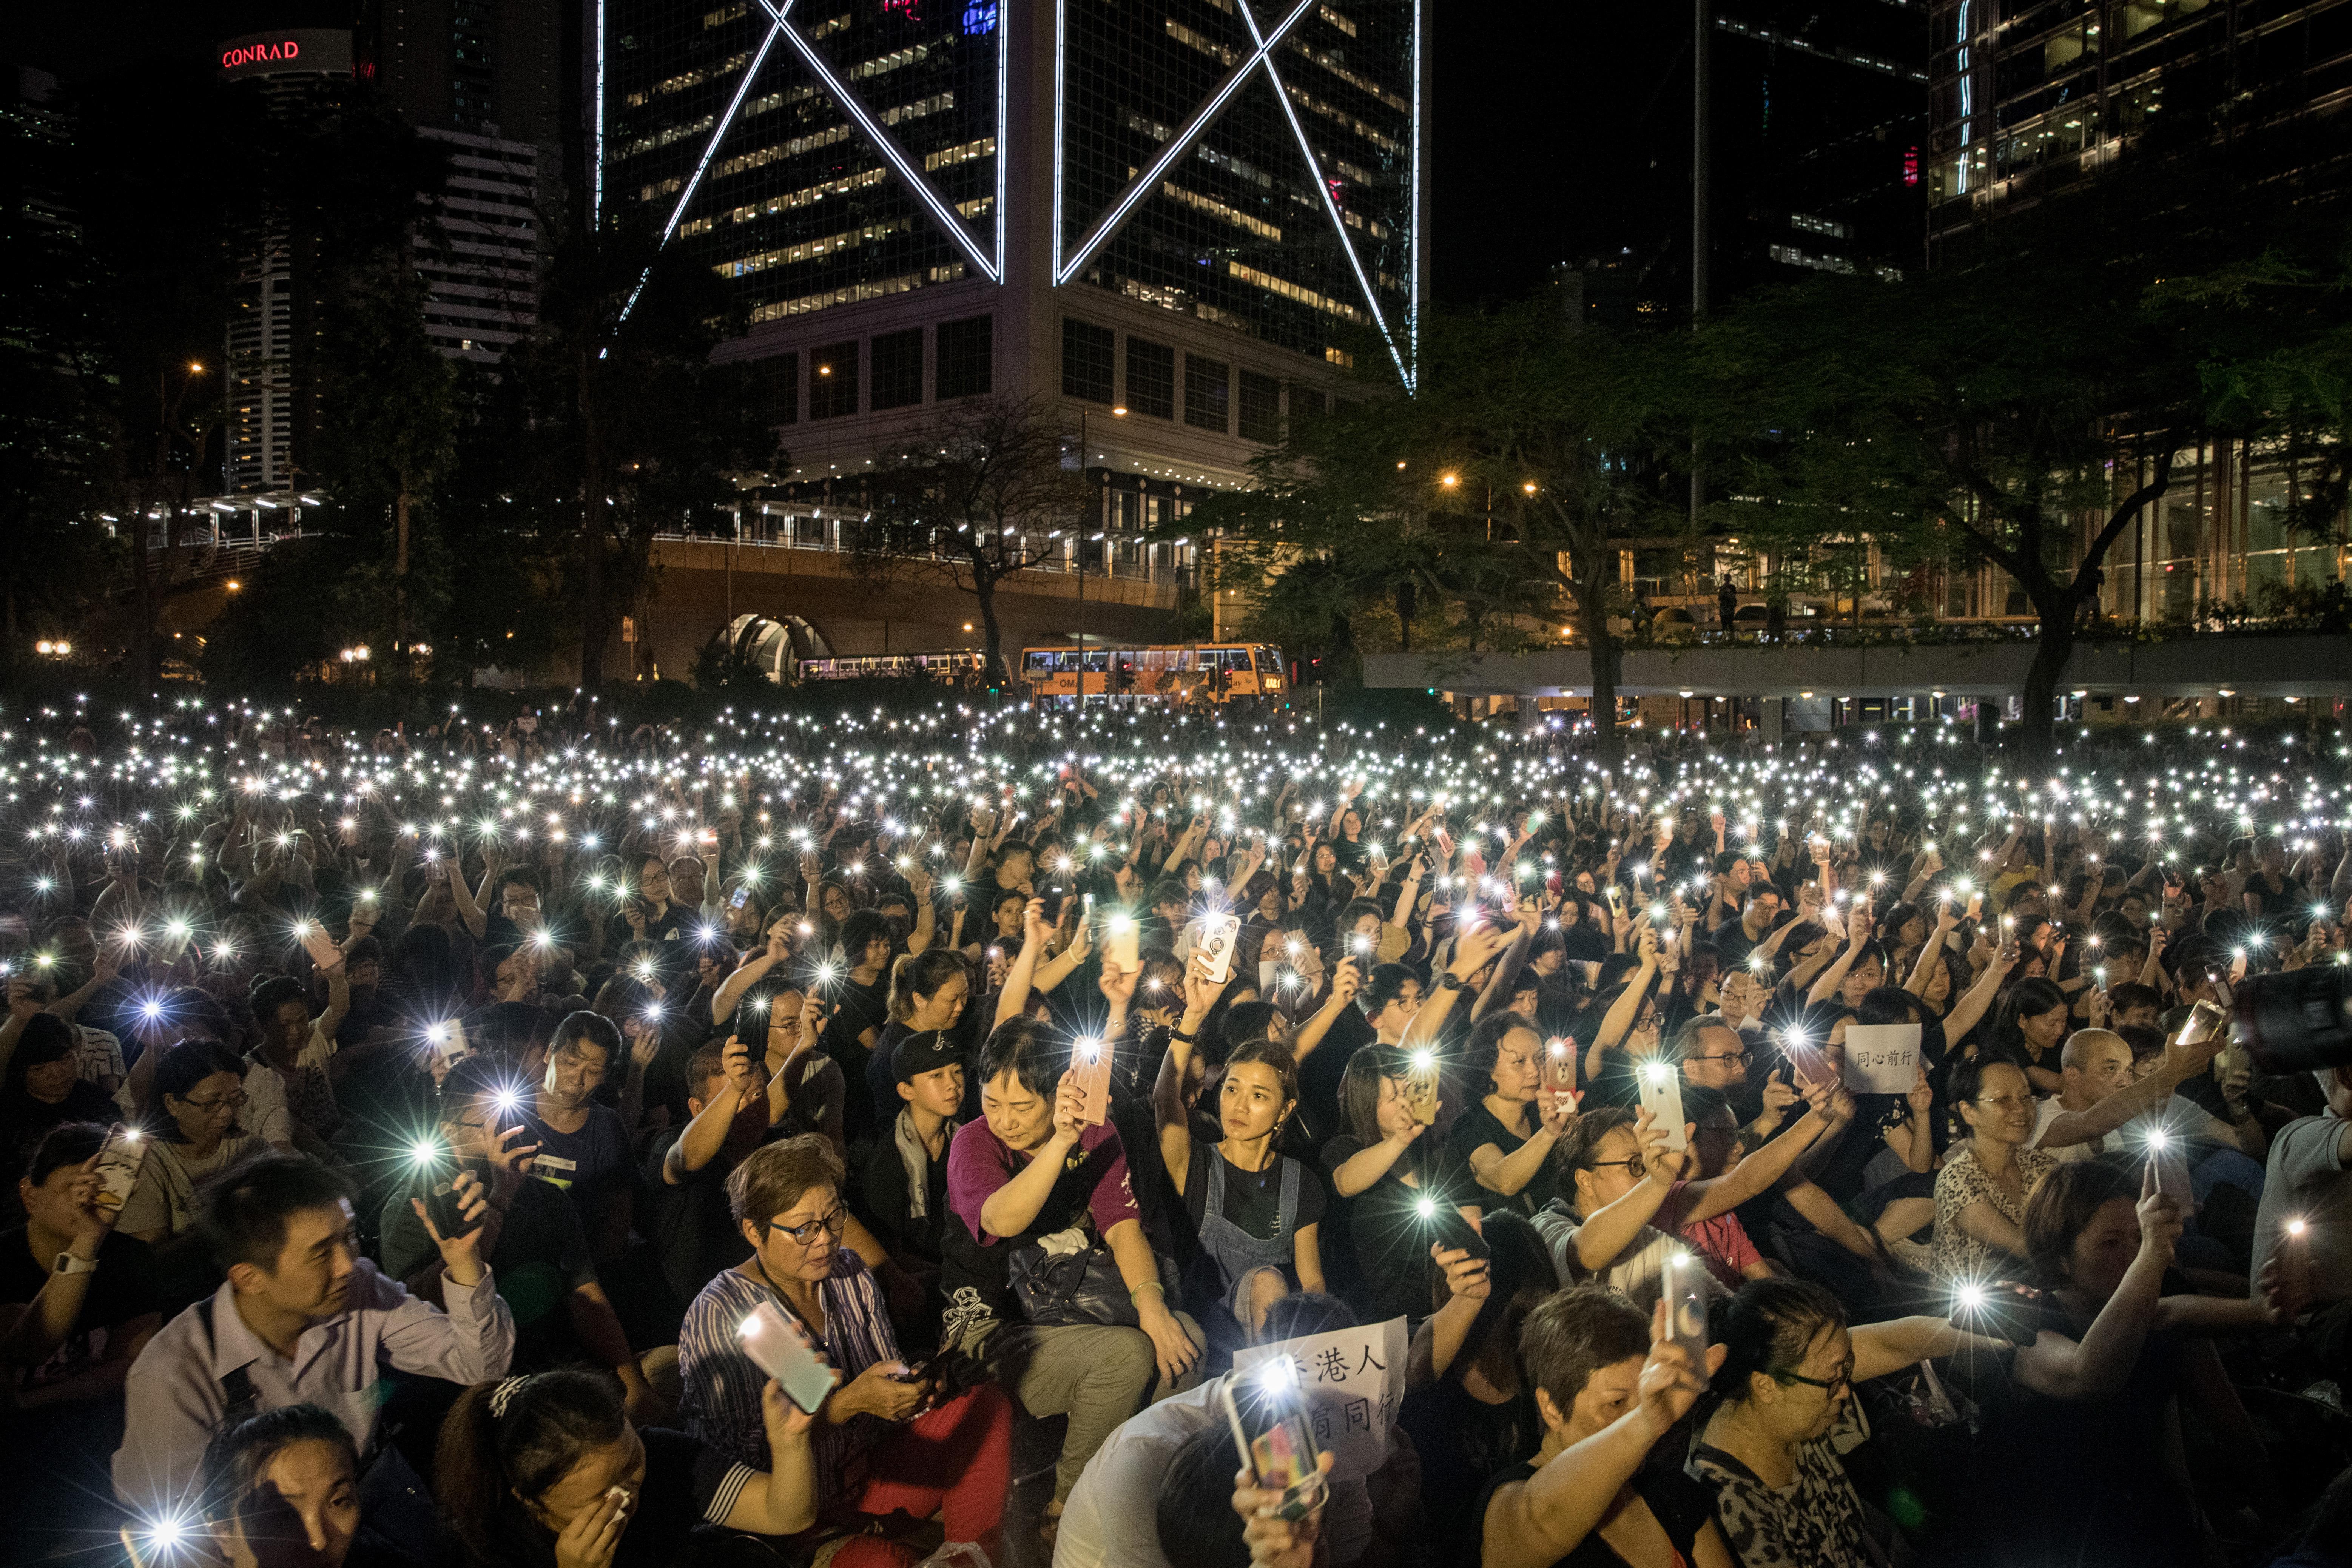 A huge crowd of protesters waving their mobile phones in the air outside at night.